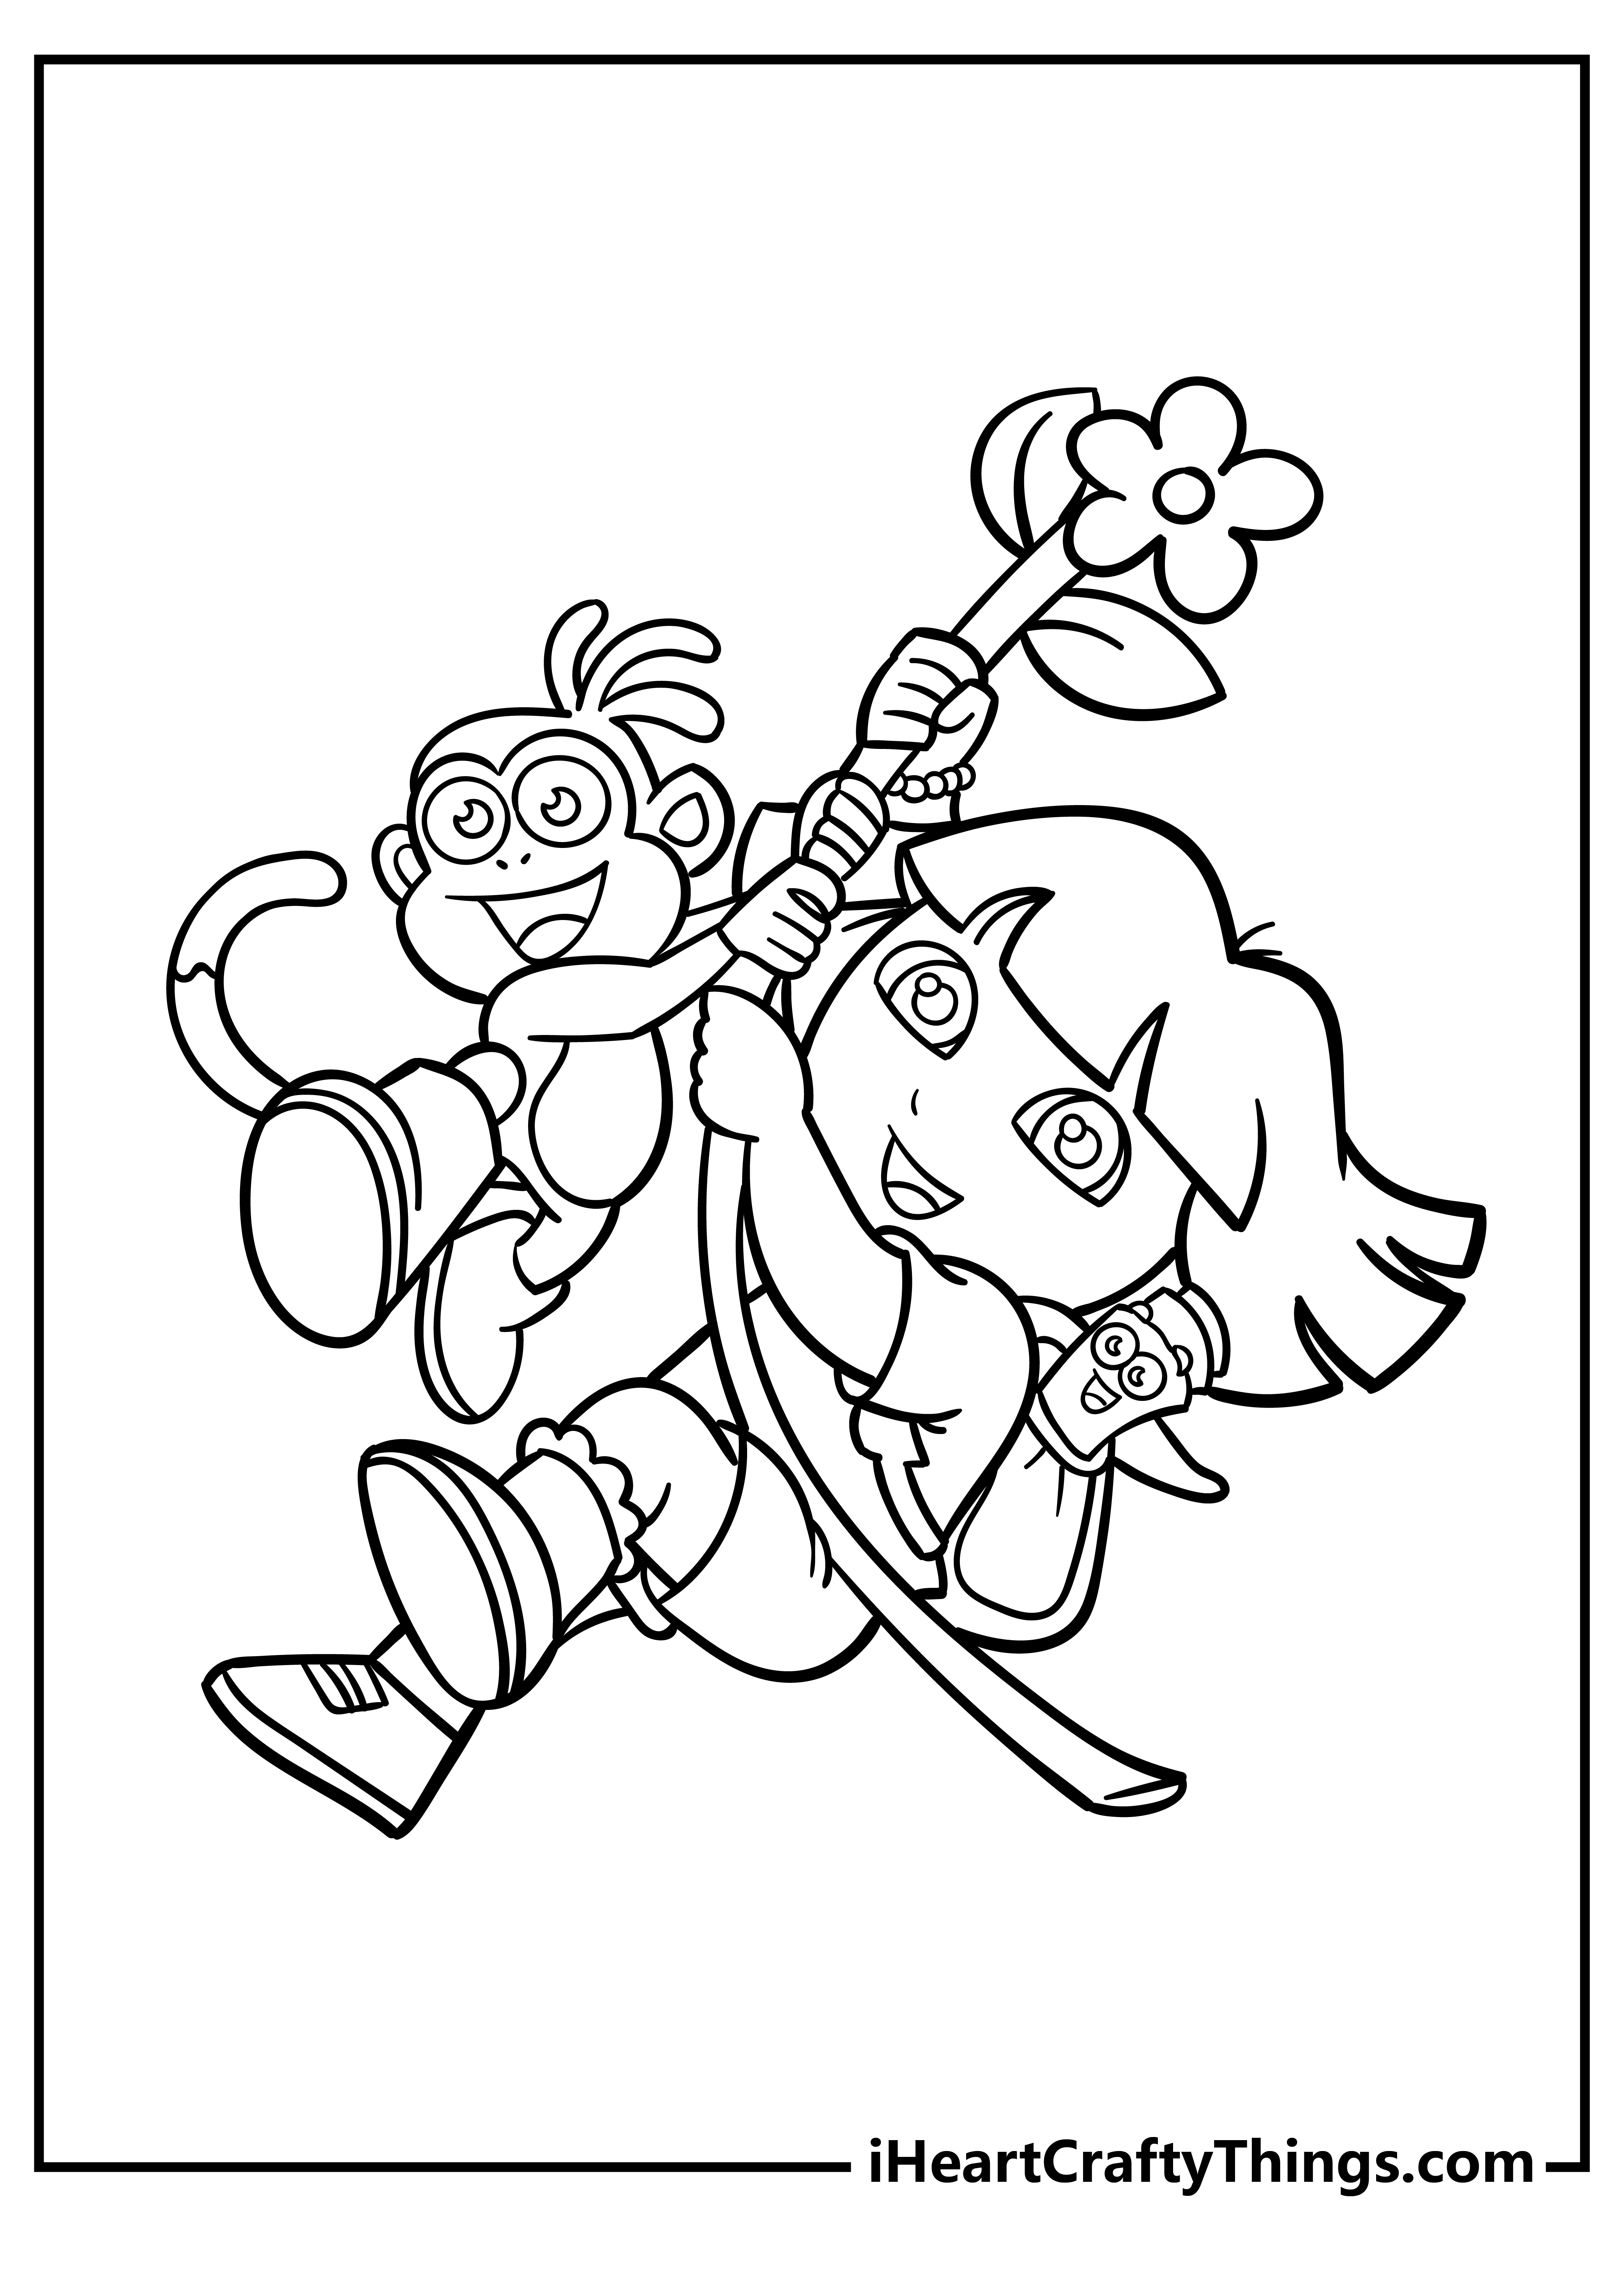 Dora Coloring Pages for preschoolers free printable